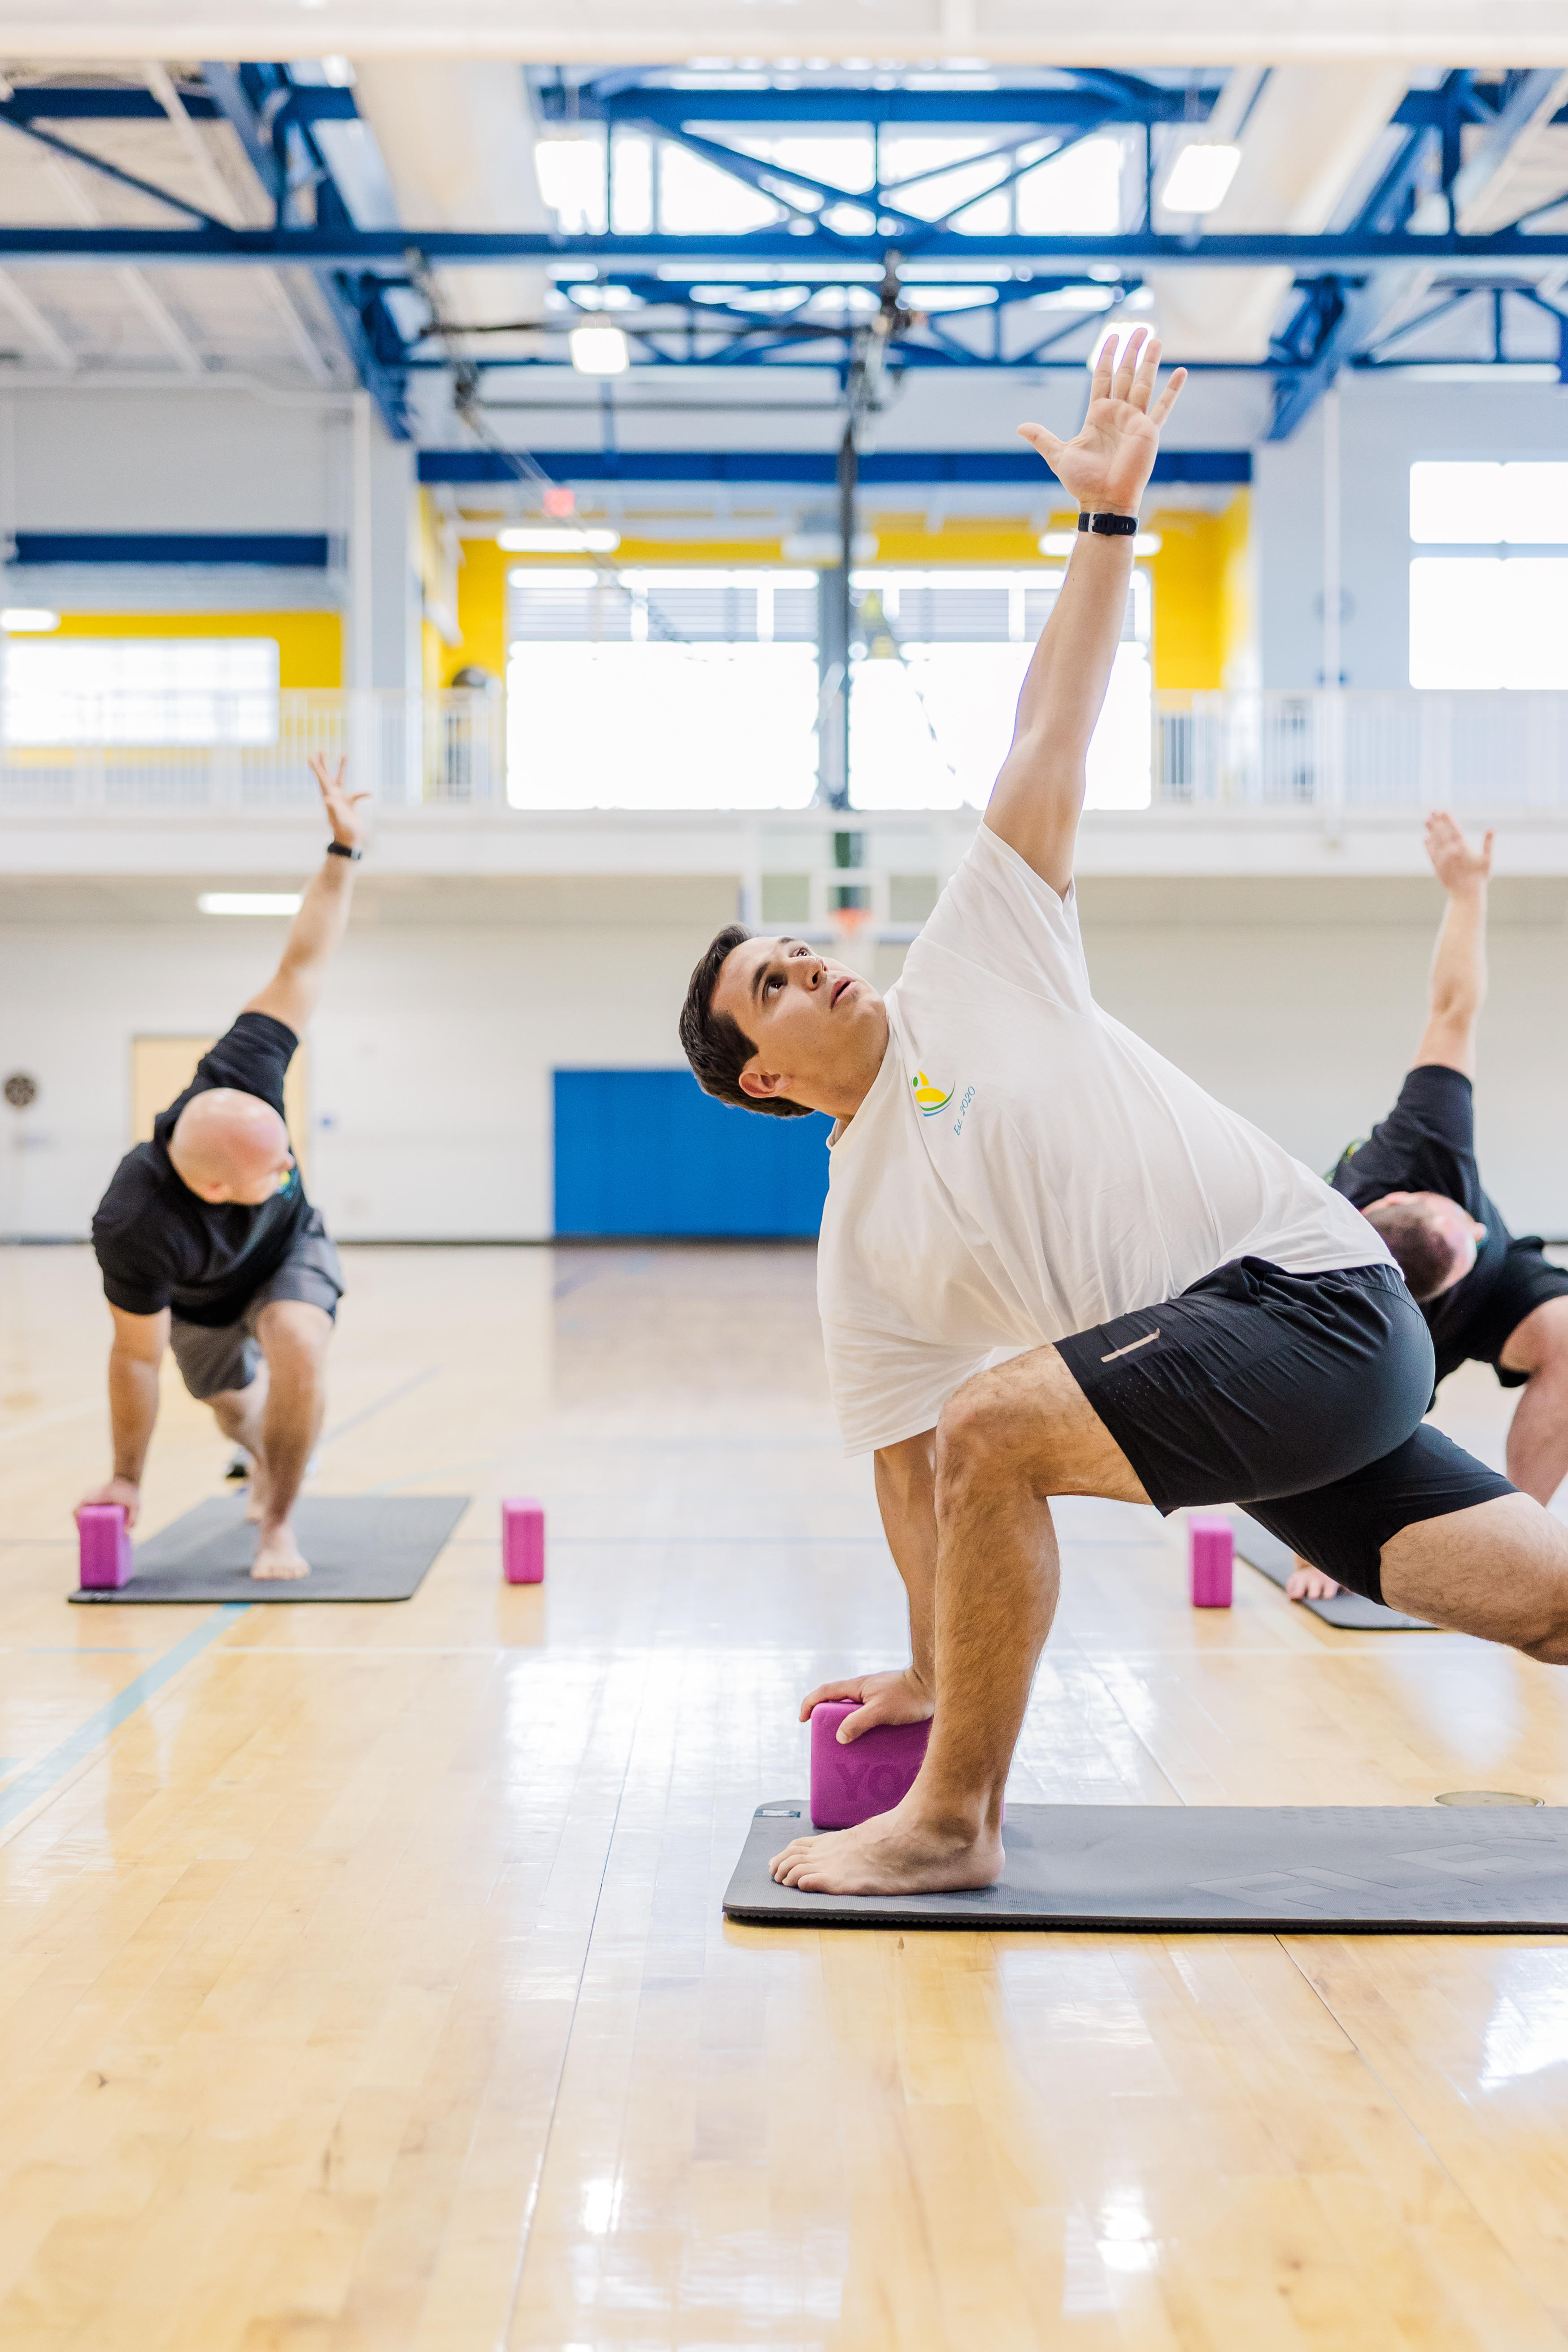 Mike offers a free yoga class every Monday morning at 7am at Island Recreation Center